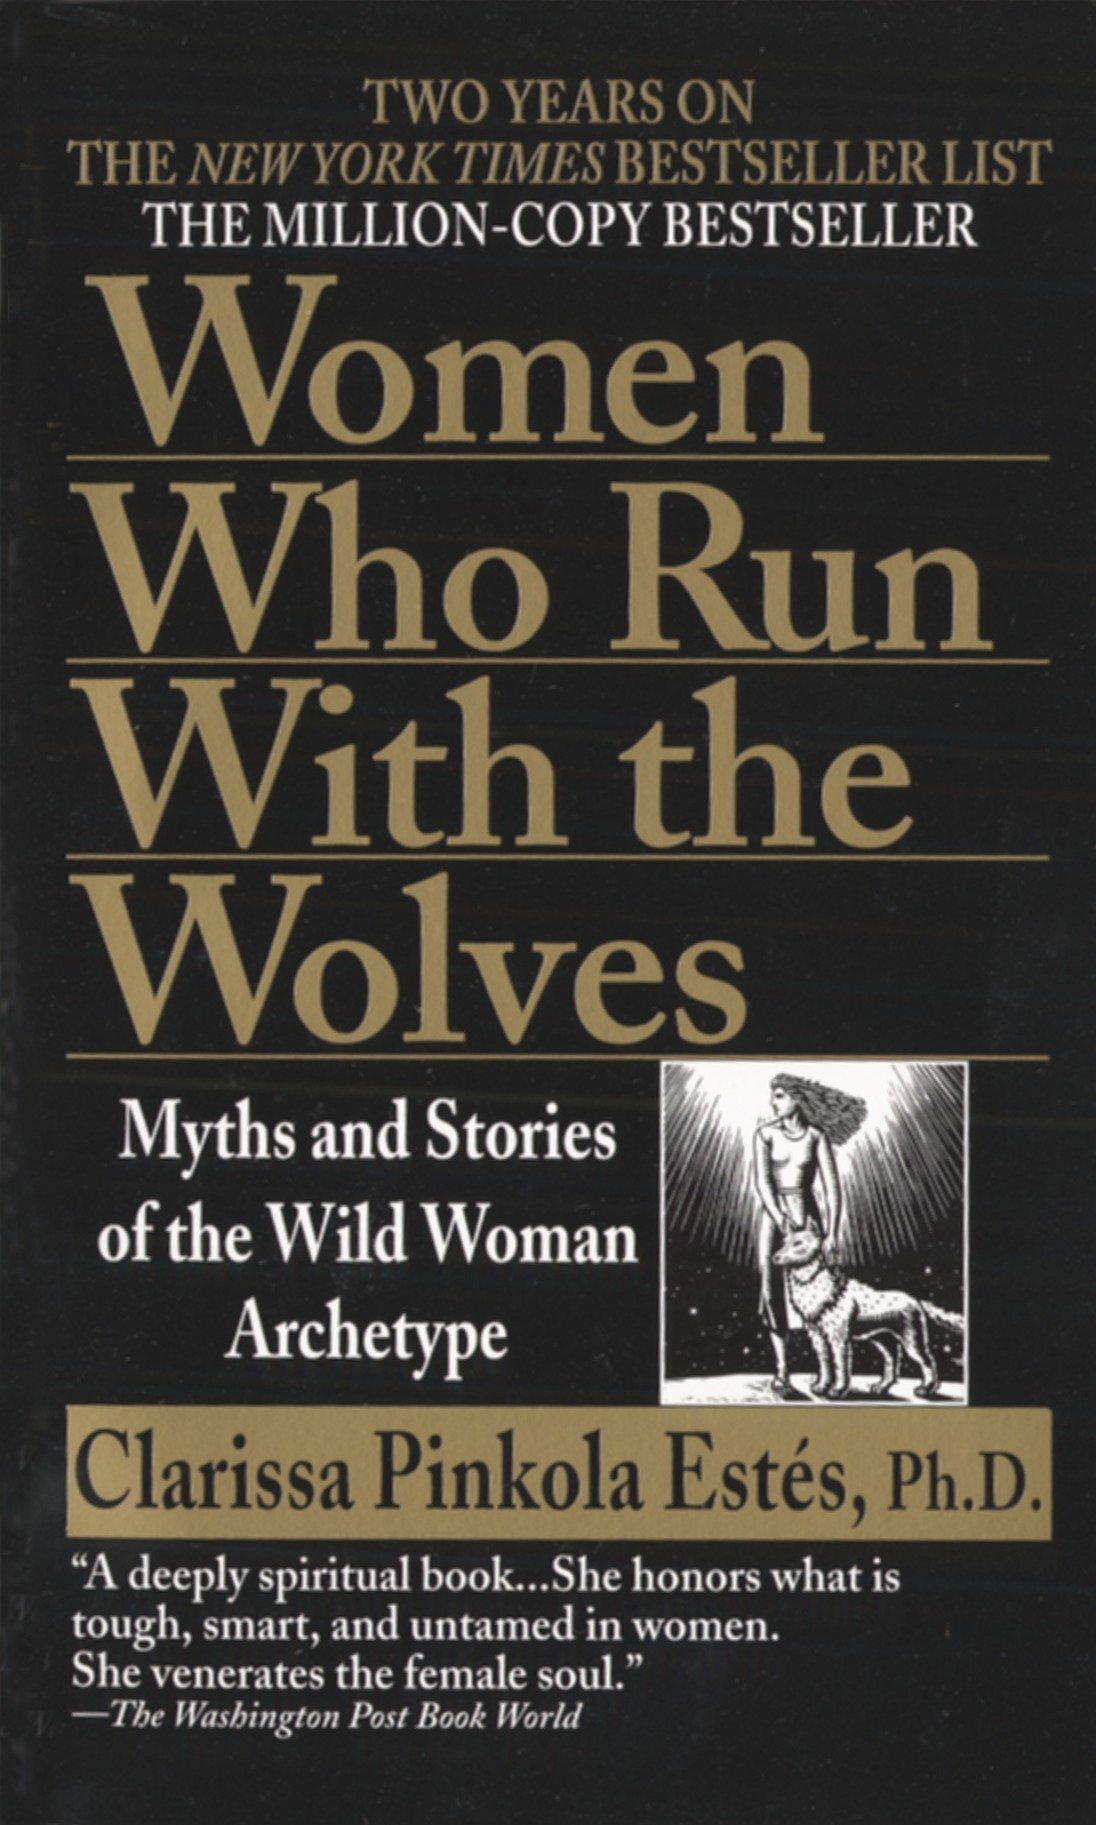 MOJO - Women Who Run With Wolves